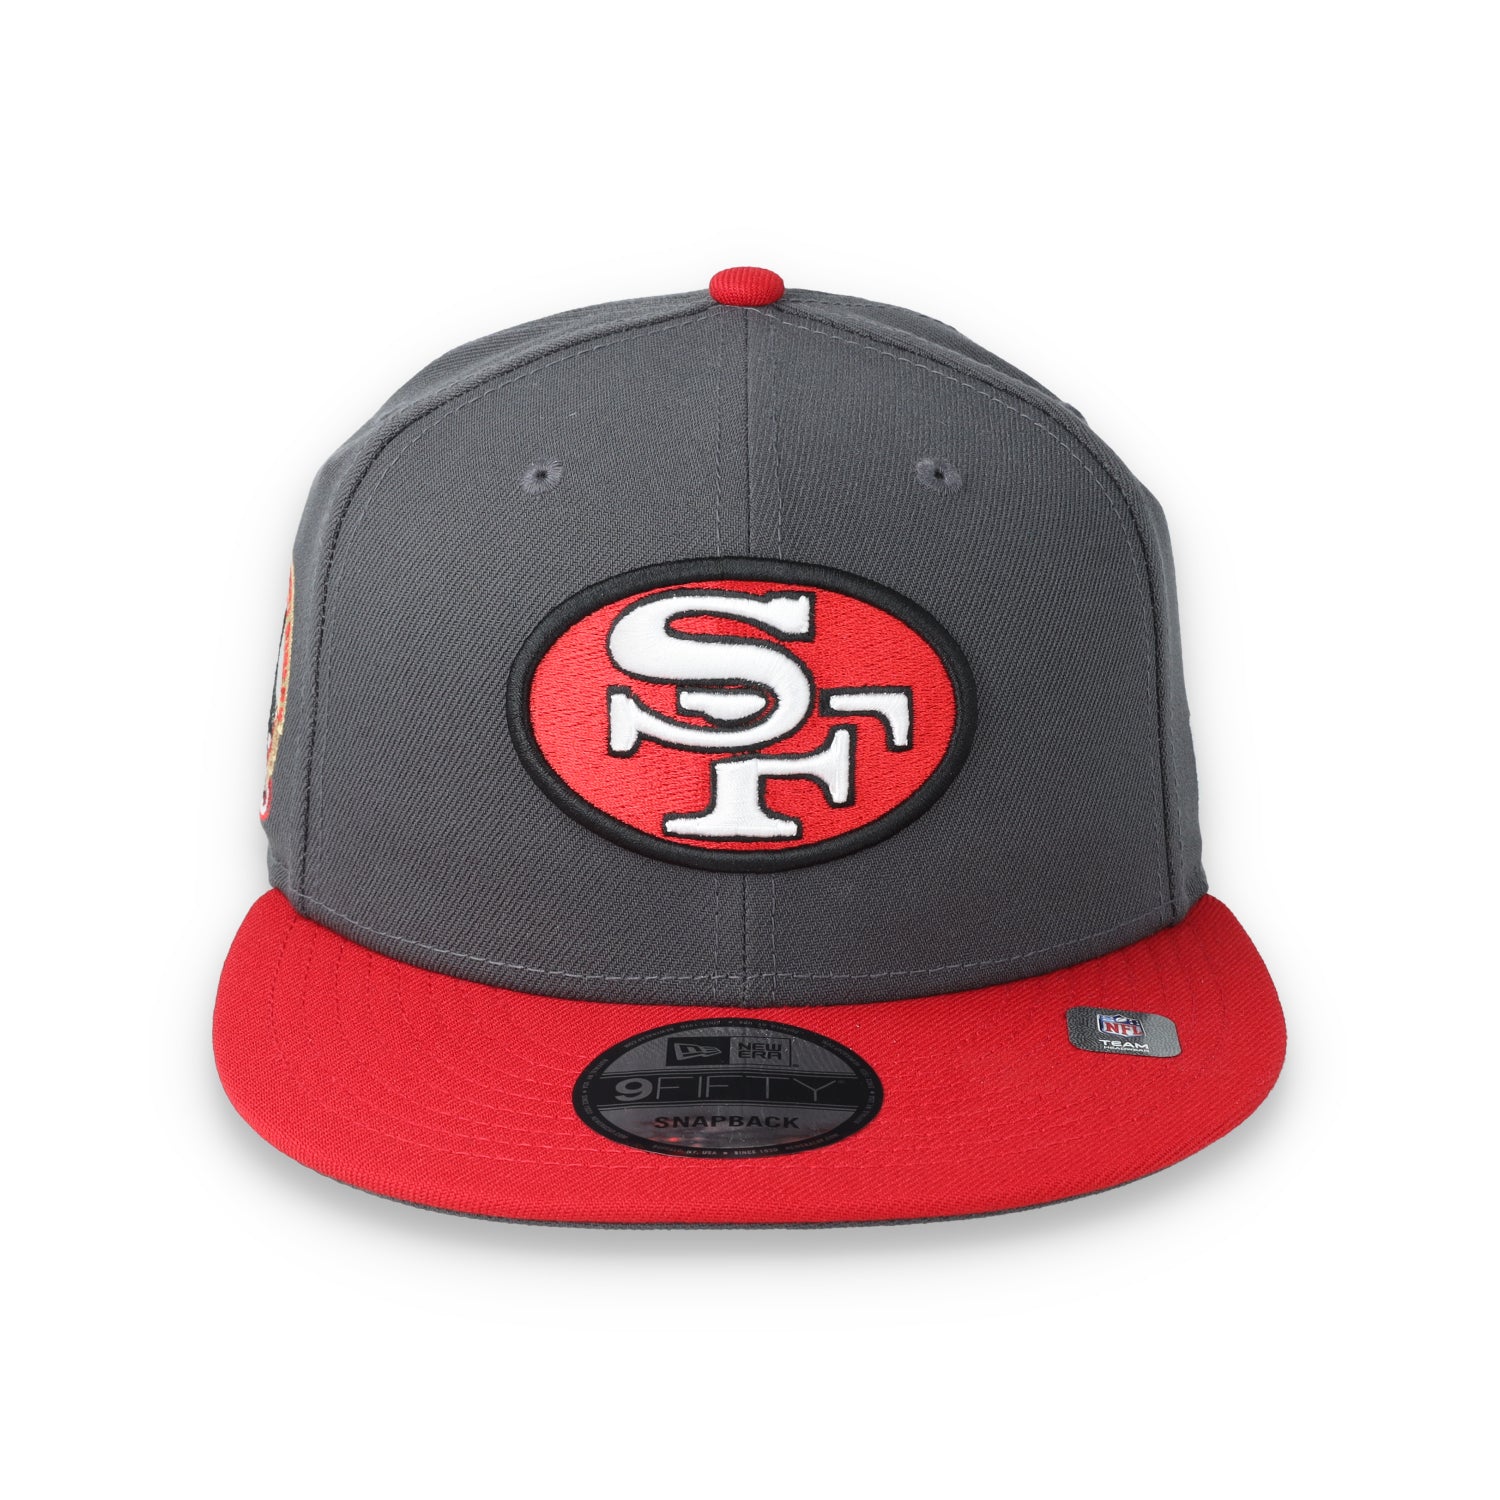 New Era San Francisco 49ers 40th Anniversary Side Patch 9FIFTY Snapback Hat-Grey/Scarlet/White